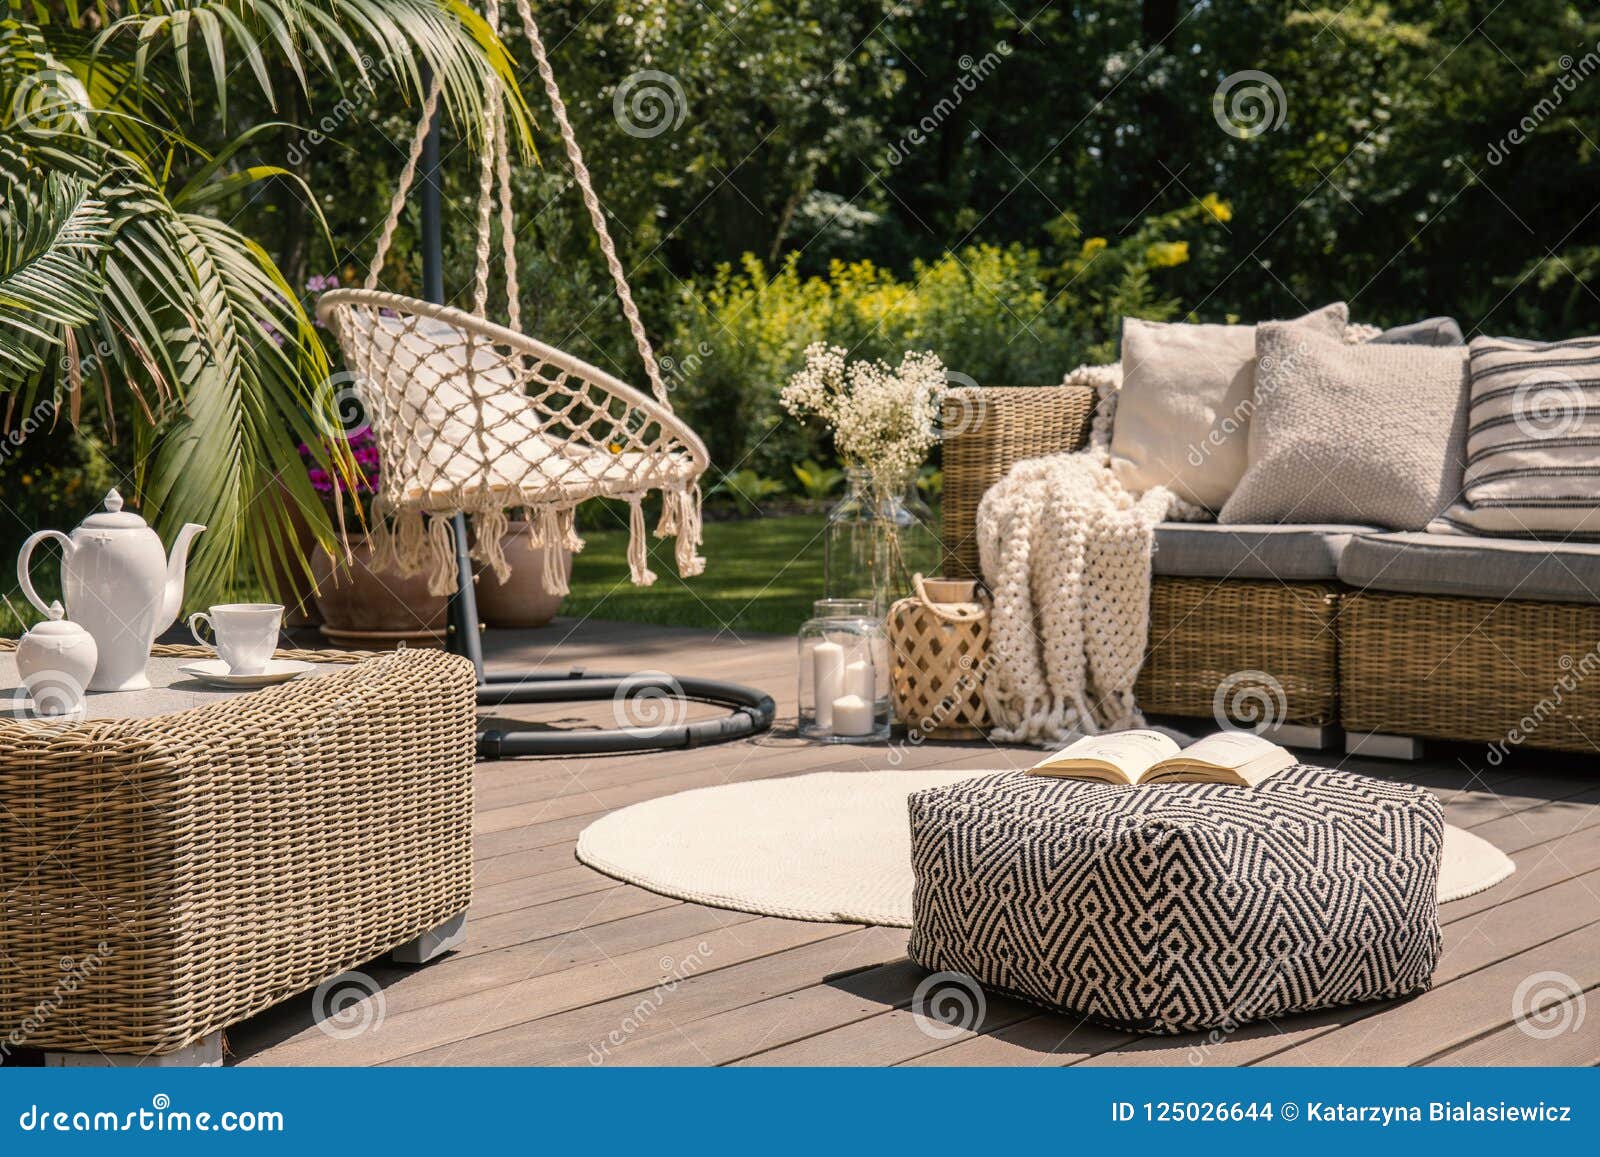 pouf on wooden terrace with rattan sofa and table in the garden with hanging chair. real photo